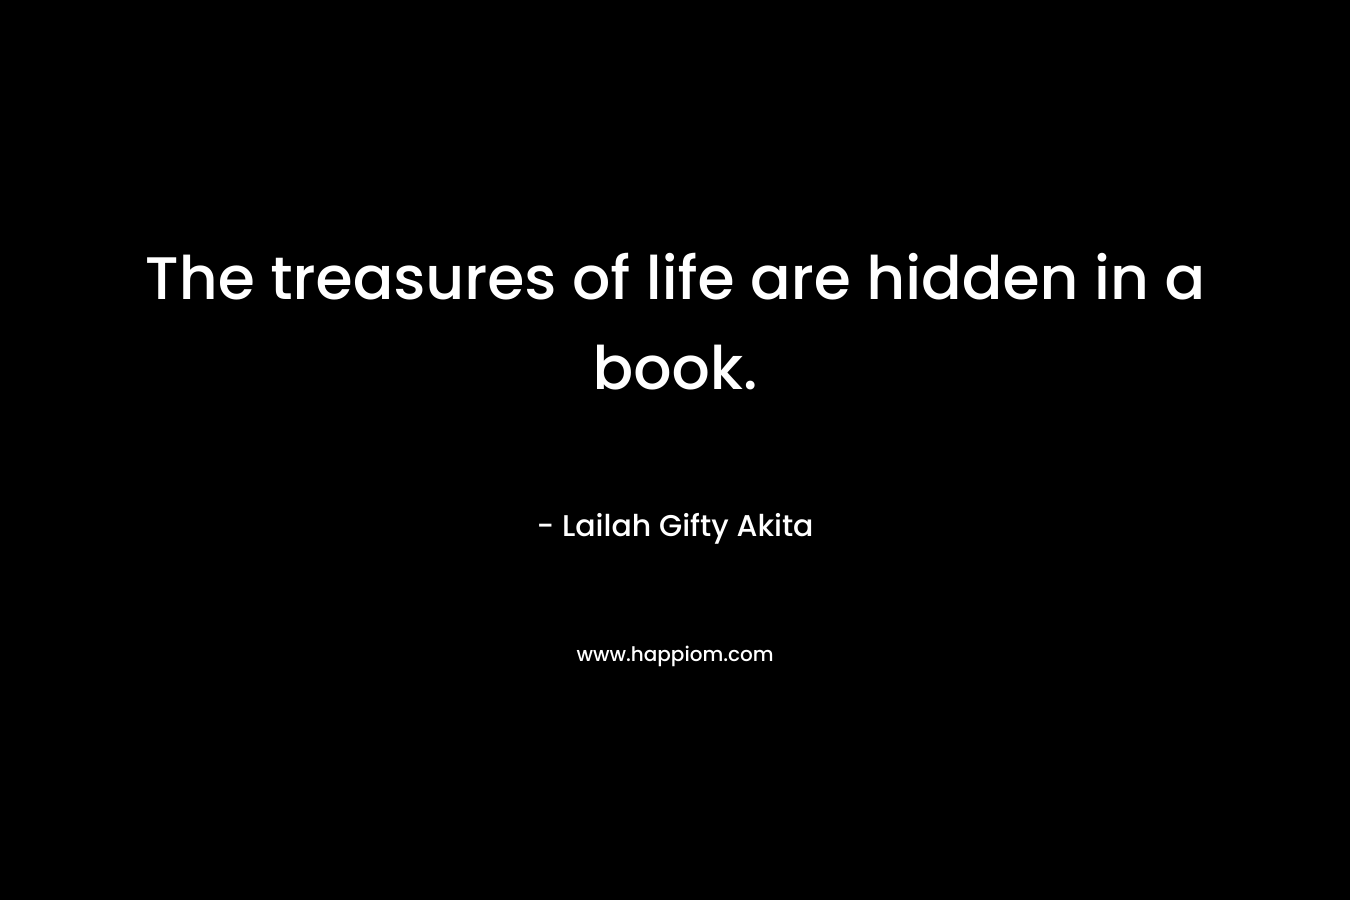 The treasures of life are hidden in a book. – Lailah Gifty Akita